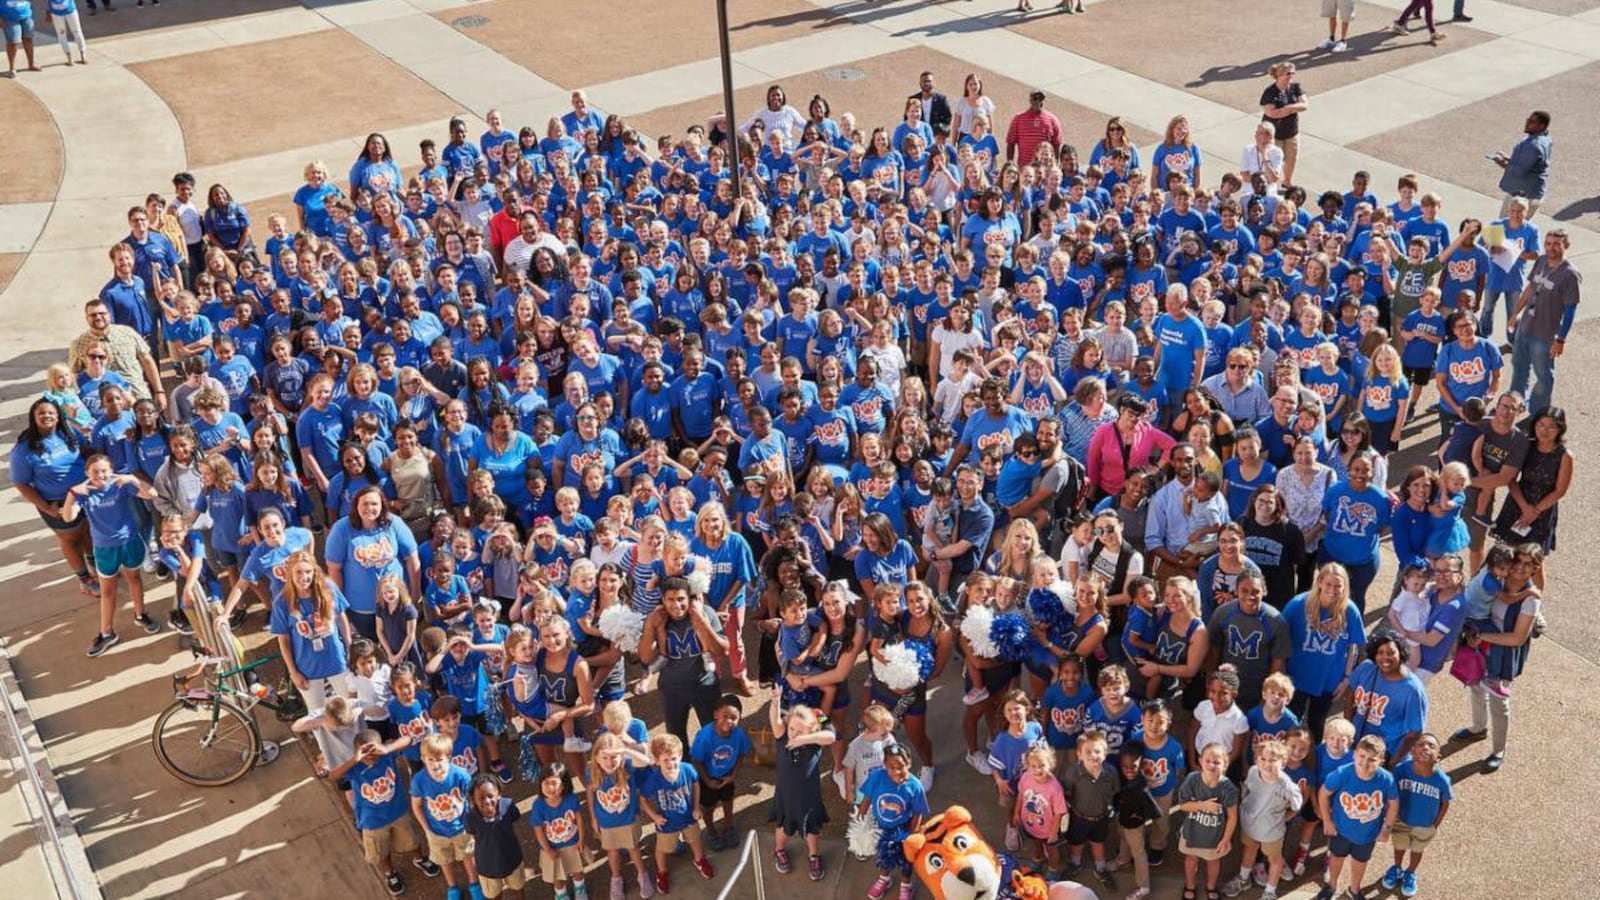 Students, parents, and staff at Campus School celebrate the beginning of a new school year with the University of Memphis' other campuses.